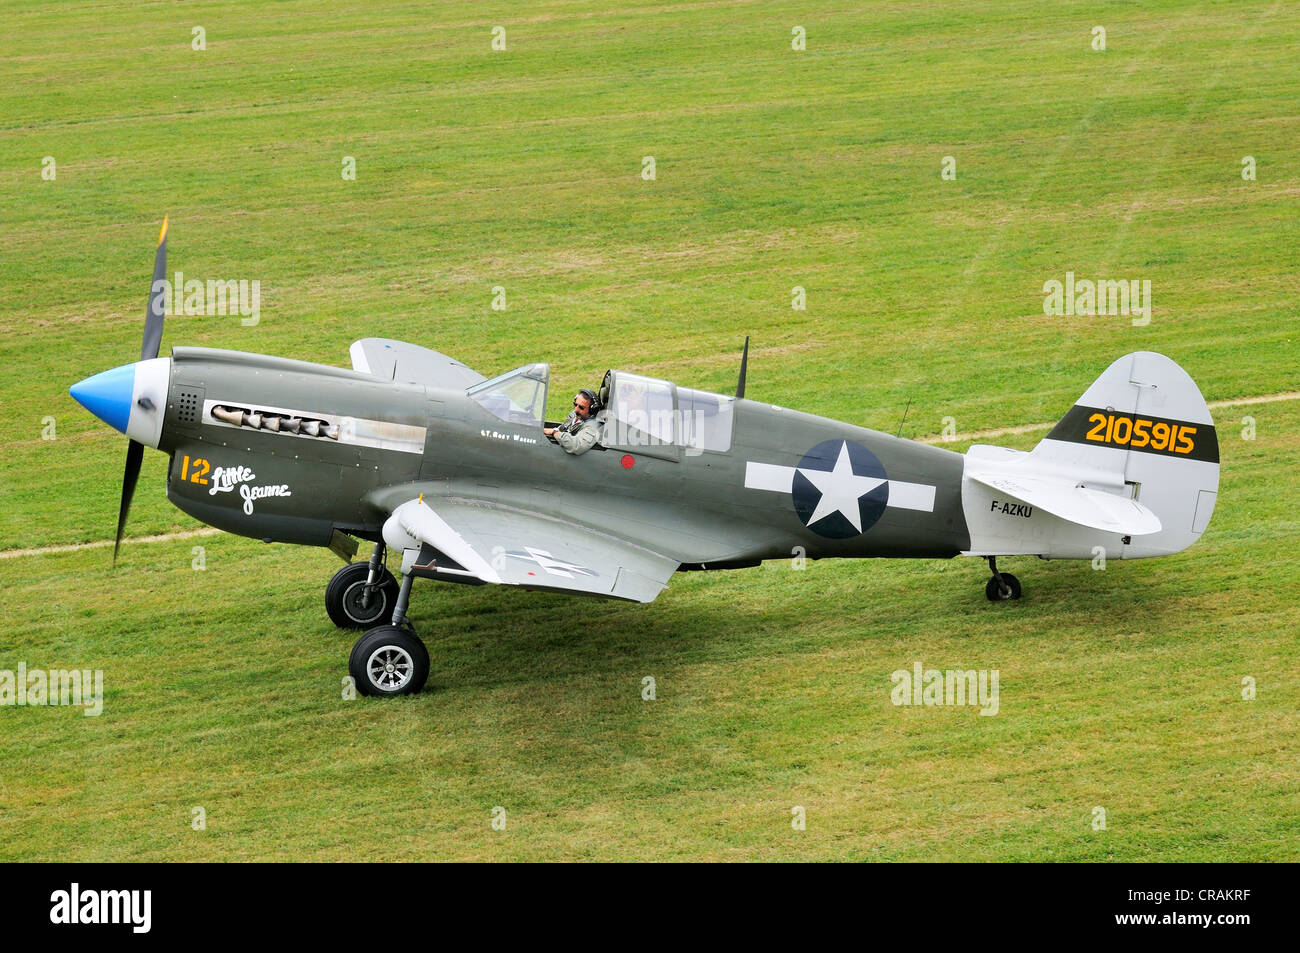 US-American fighter Curtiss P-40 Kittyhawk, Europe's largest meeting of vintage aircraft at Hahnweide, Kirchheim-Teck Stock Photo